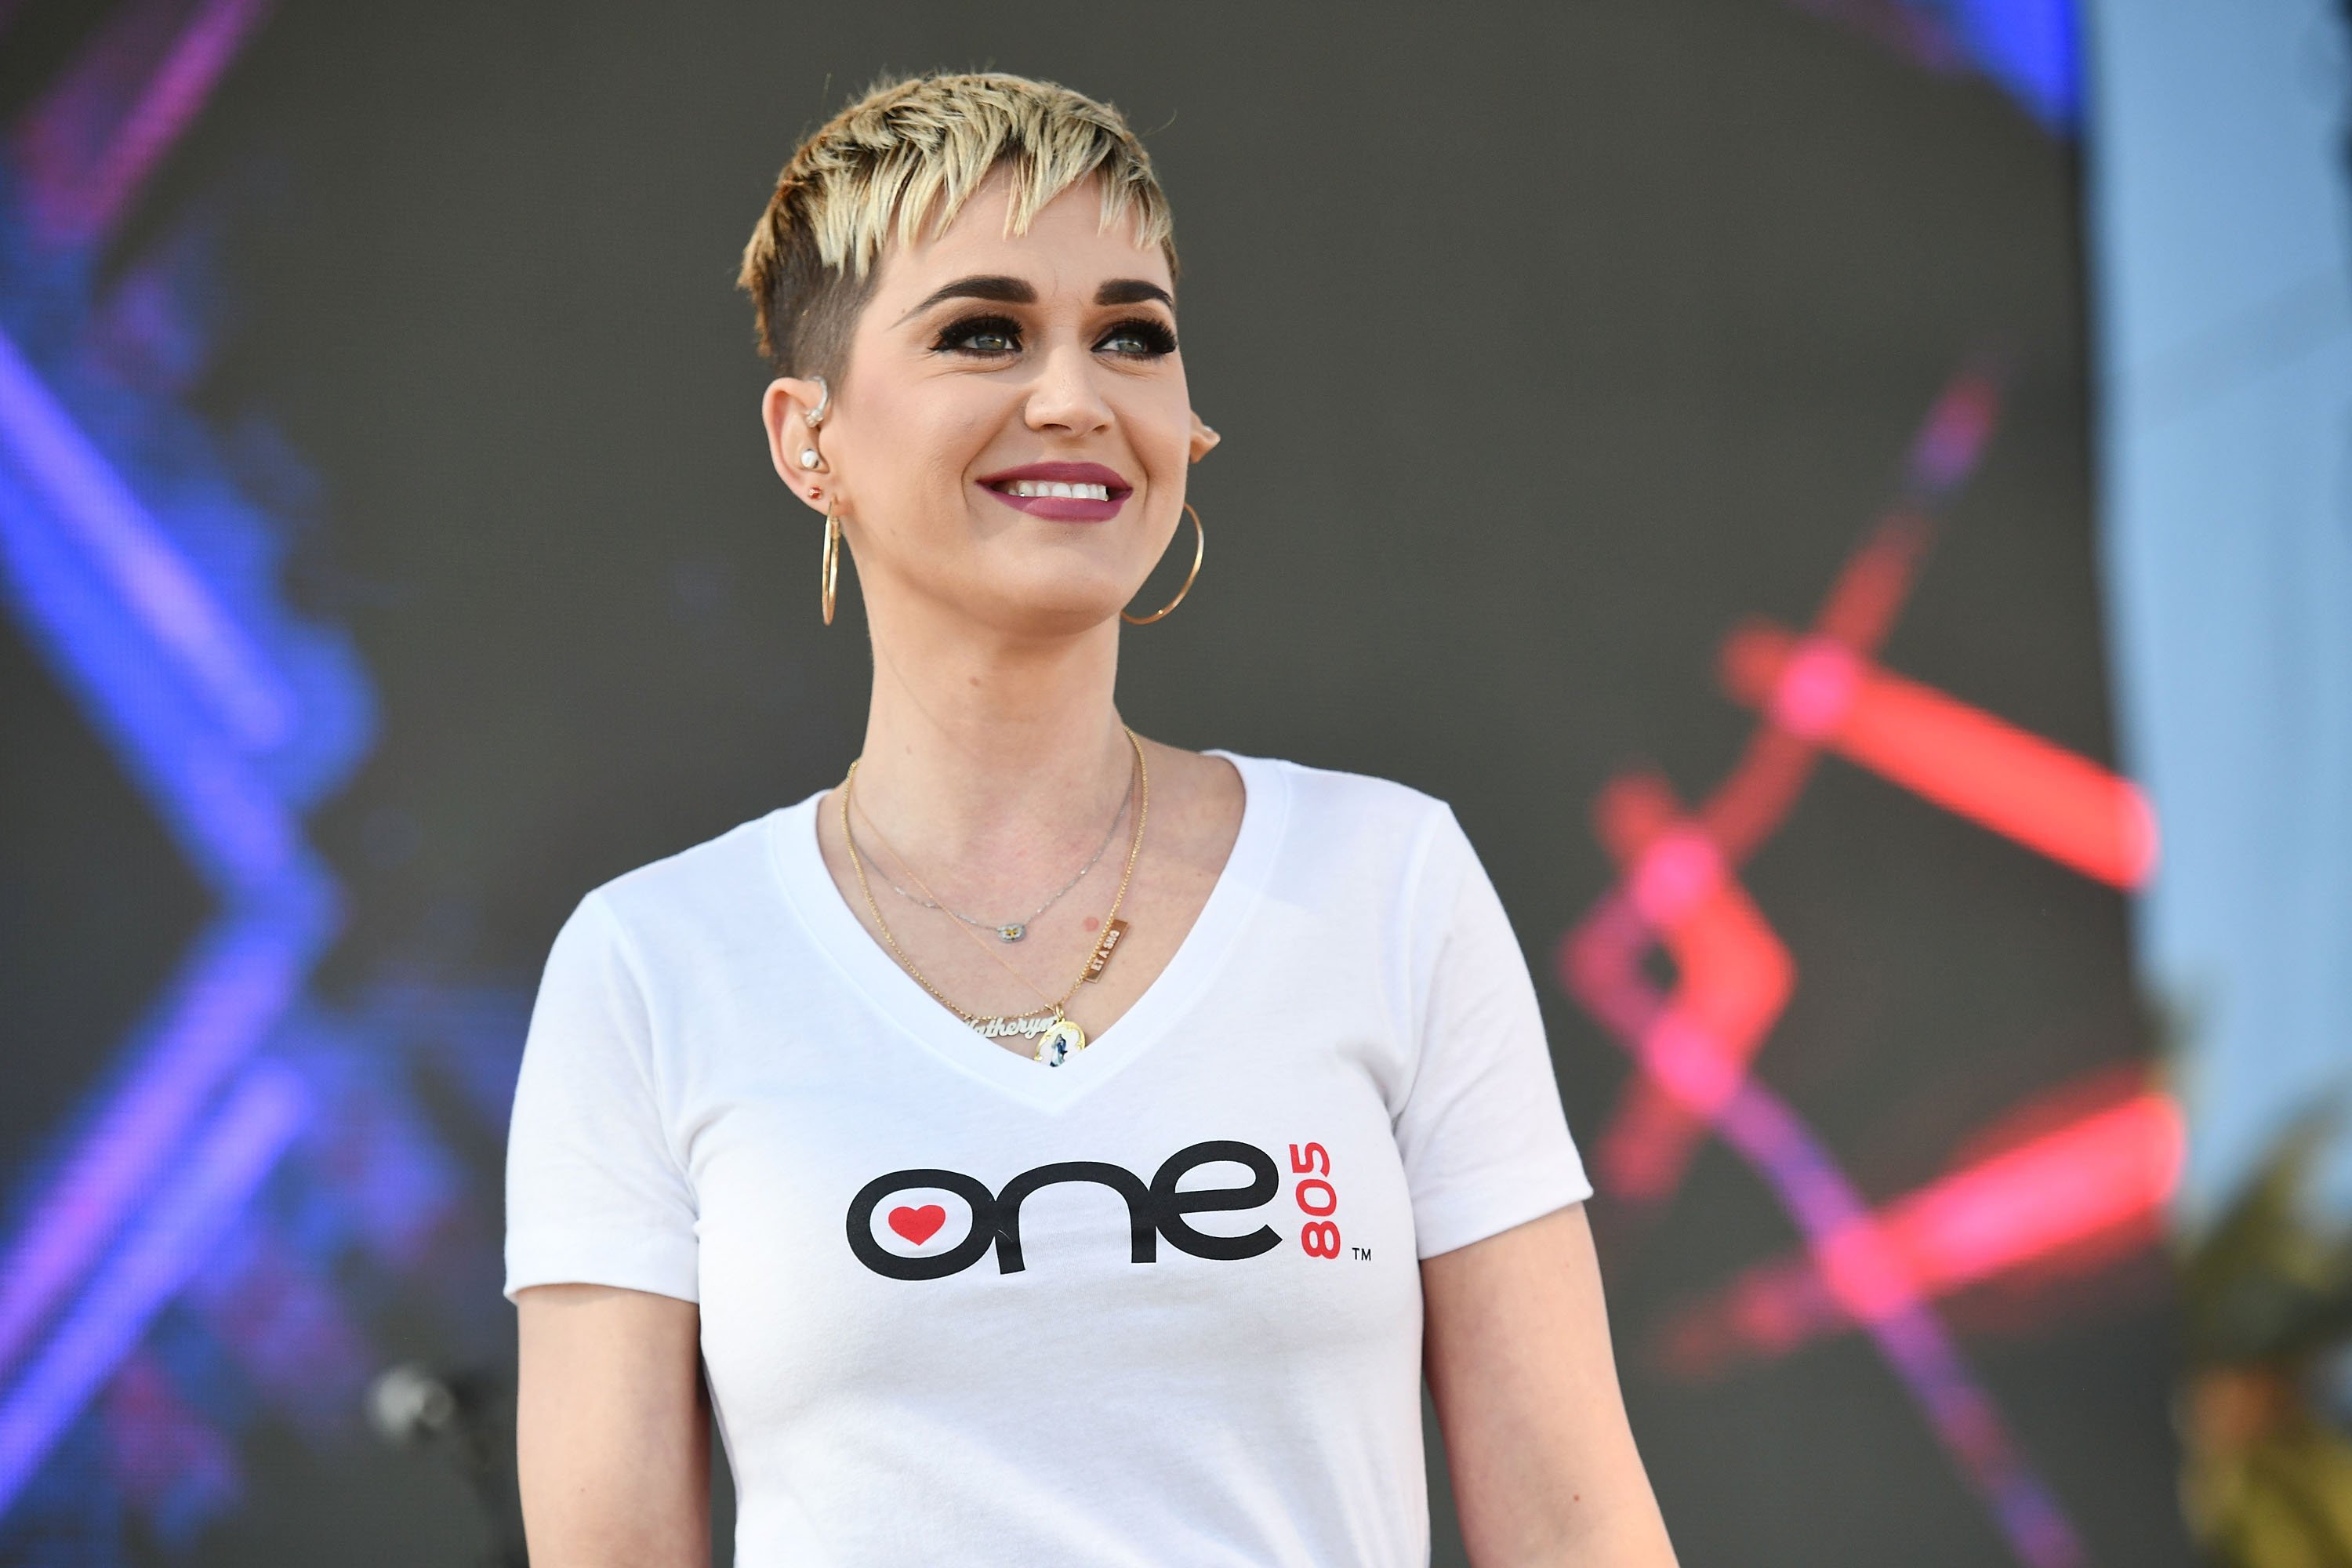 Singer and American Idol judge Katy Perry. | Photo: Getty Images